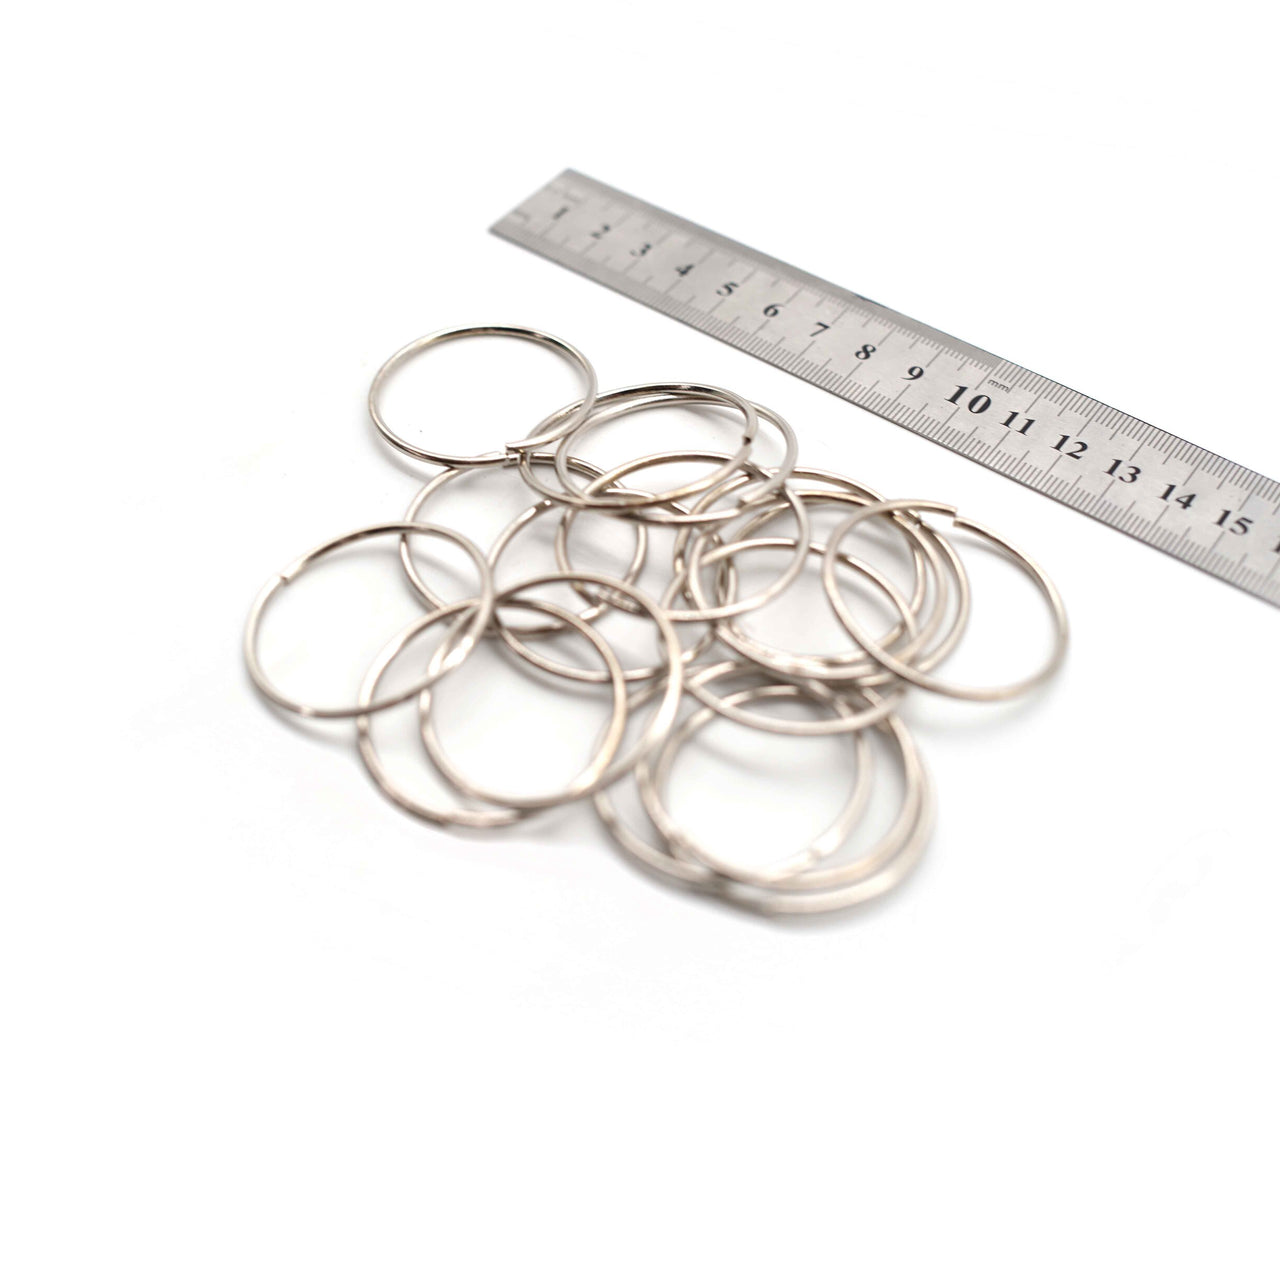 O Rings - 36mm - Silver - Pack of 10 (Thin)